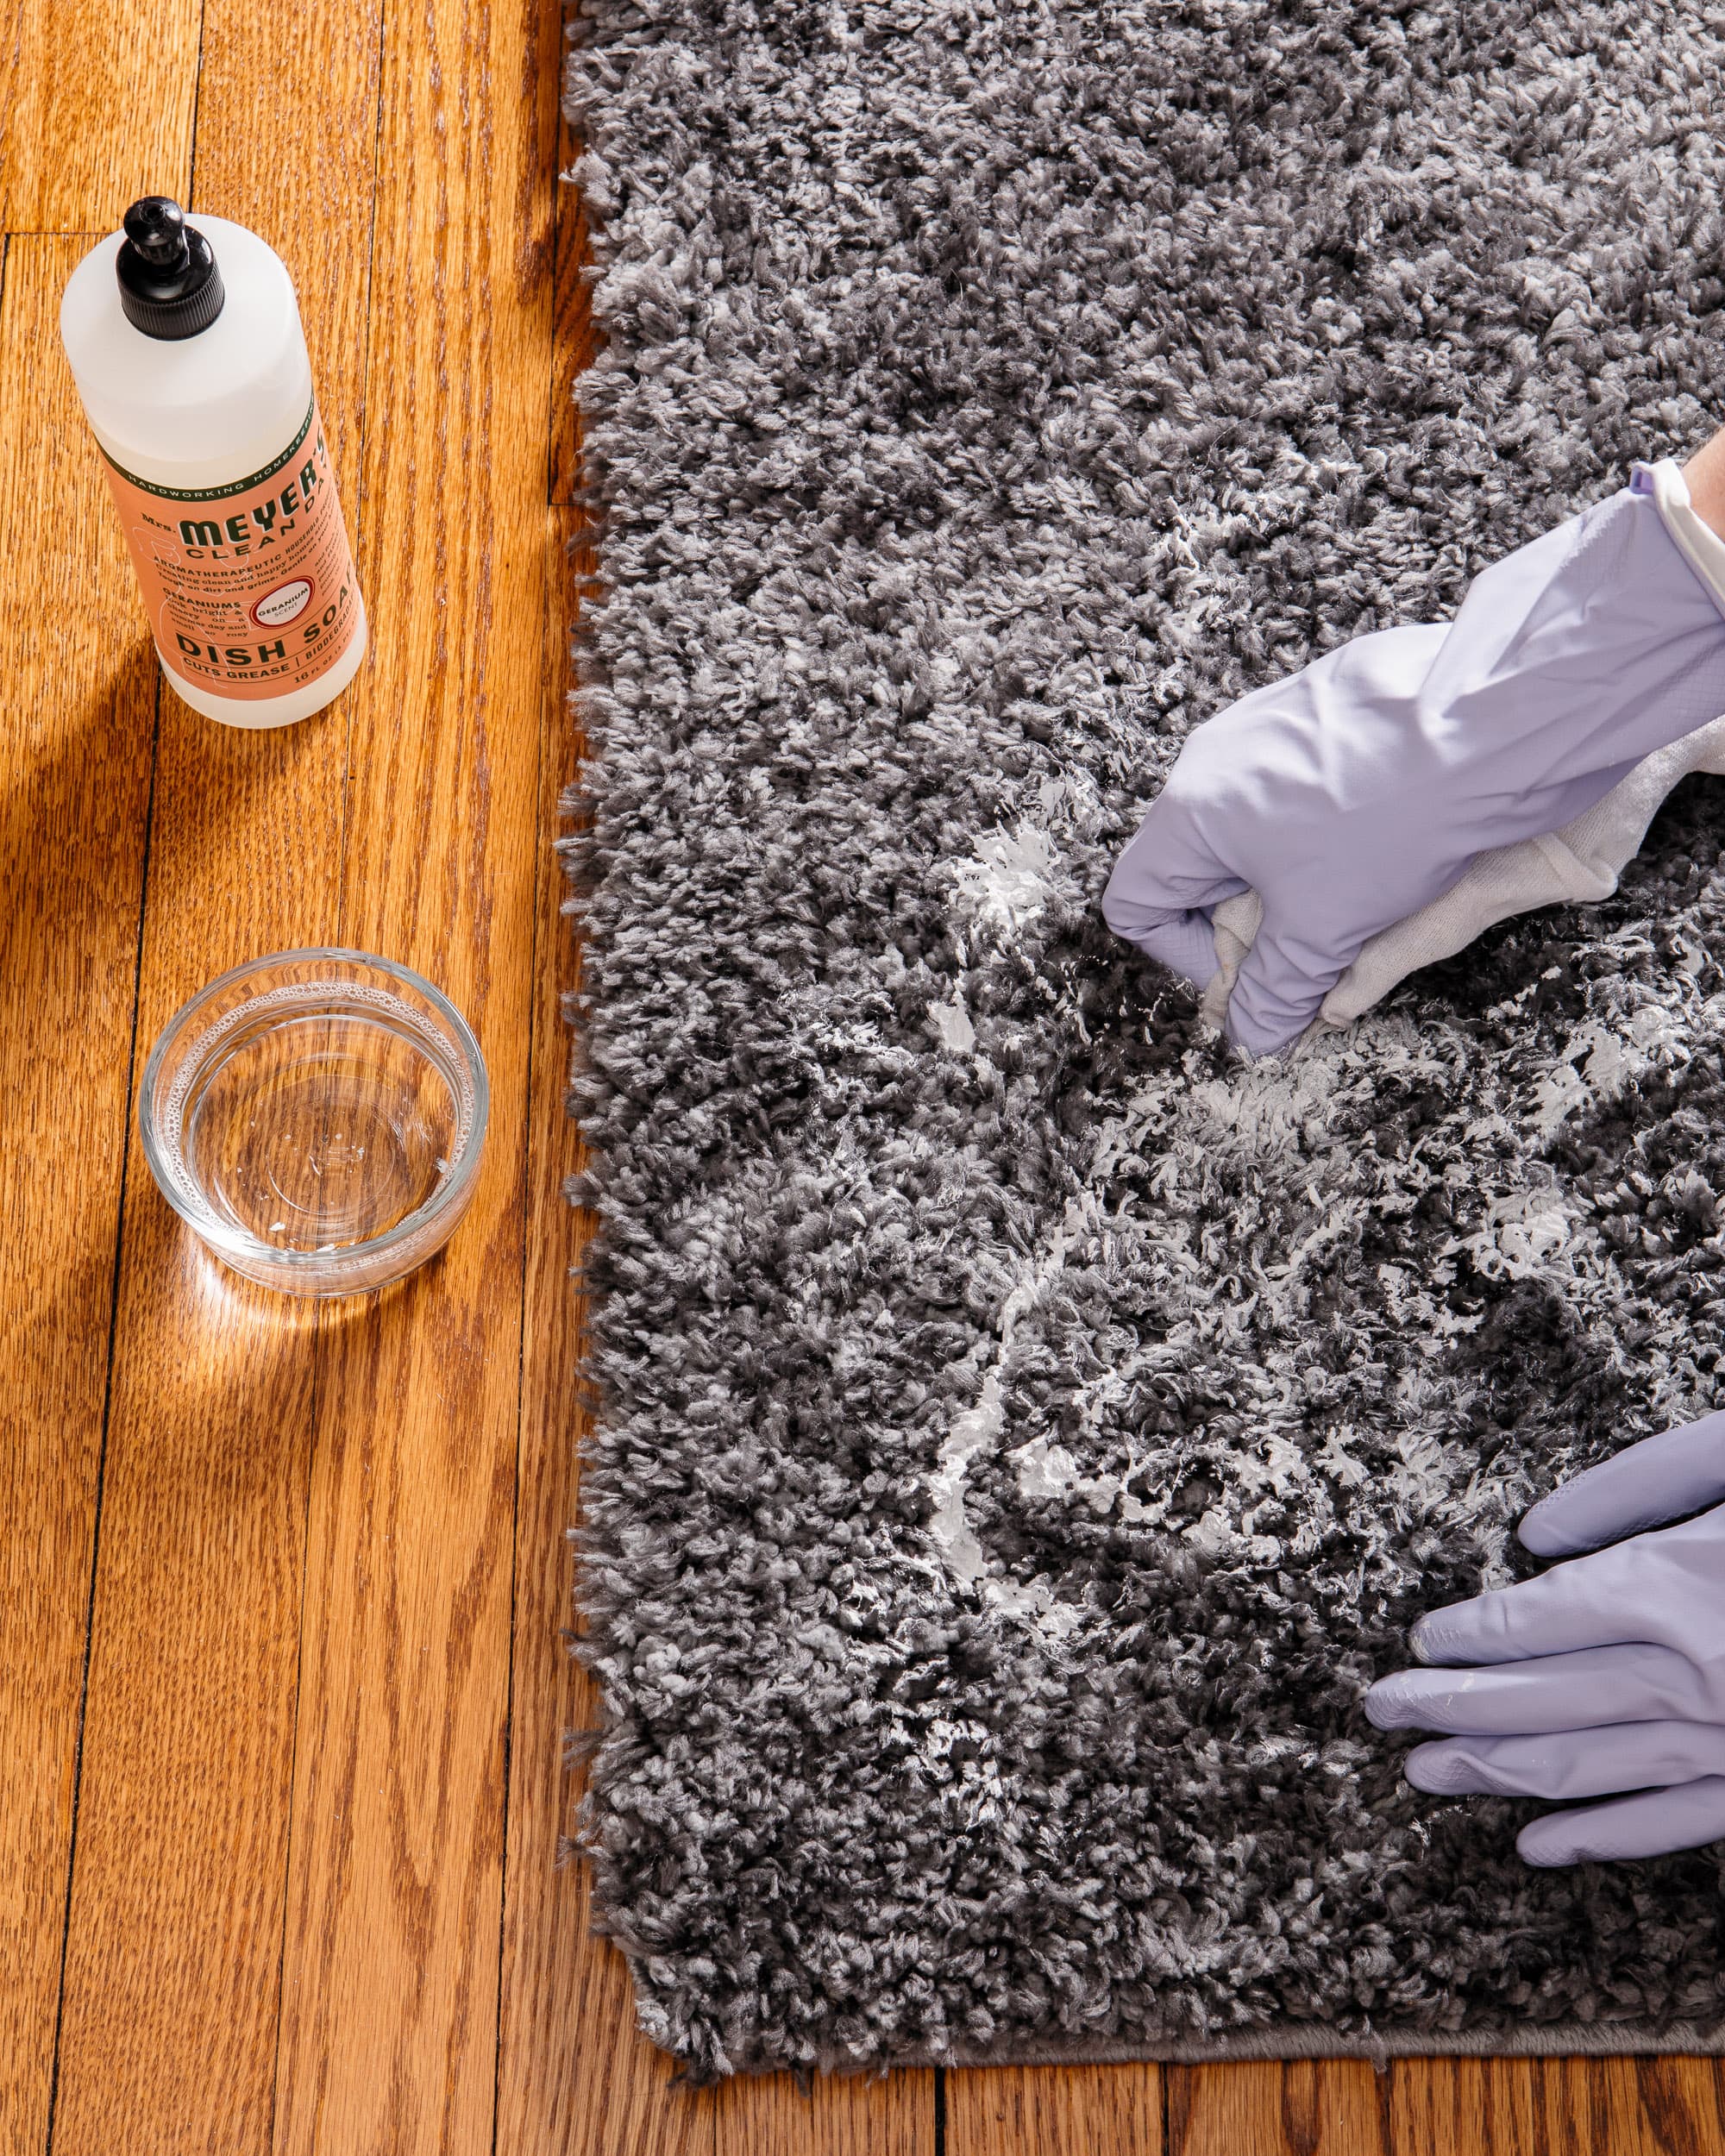 How to Get Paint Out of Carpet - 18 Ways to Remove Paint Stains